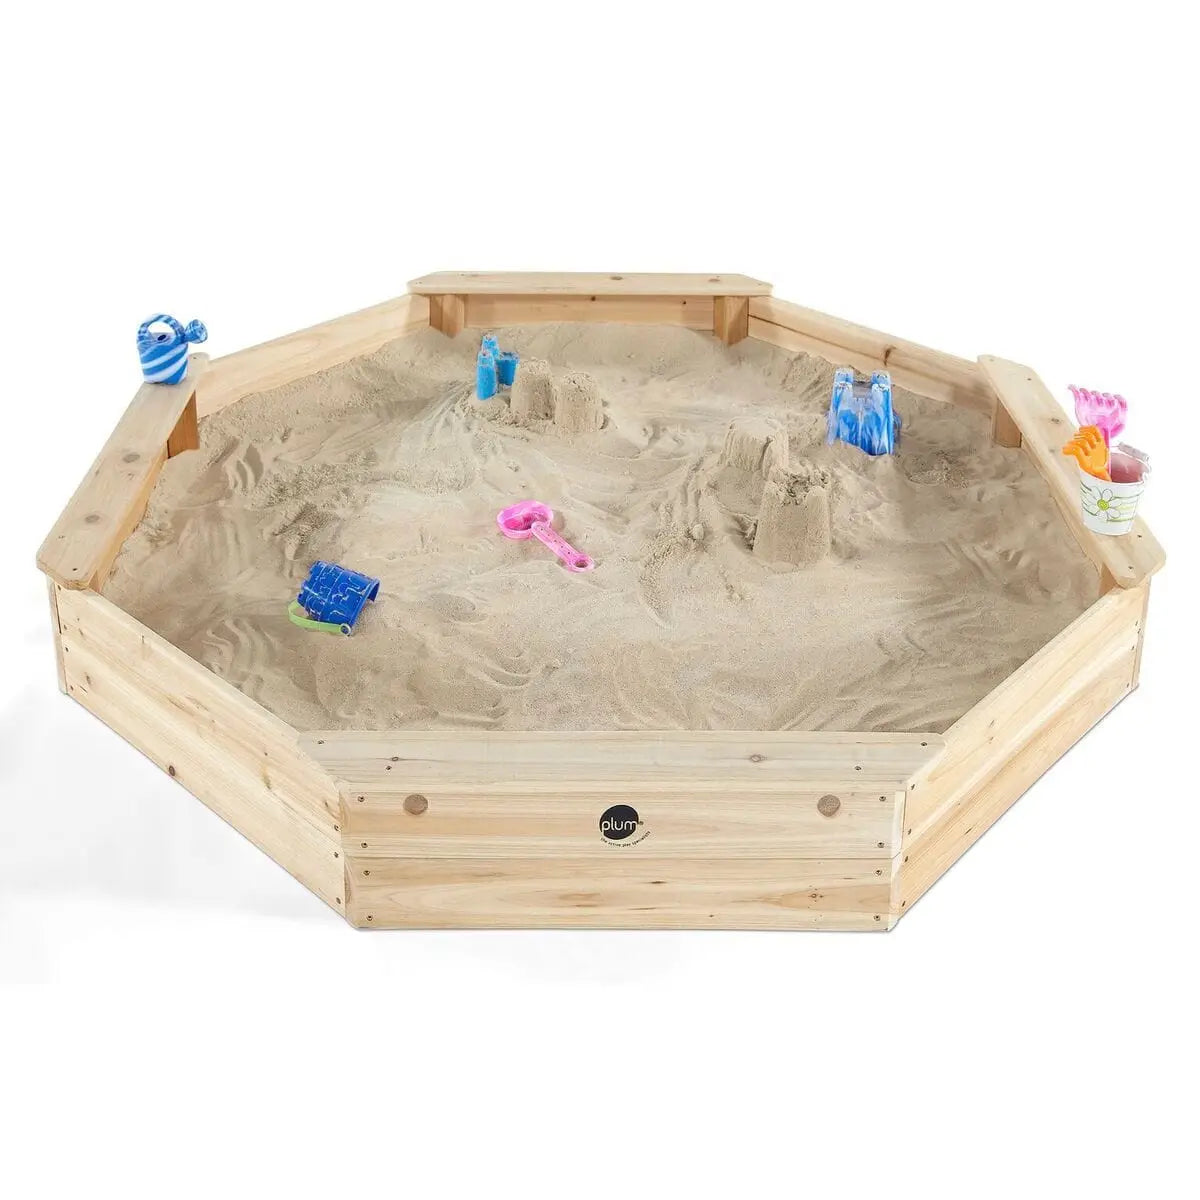 Sandpits for Some Sandy Fun!